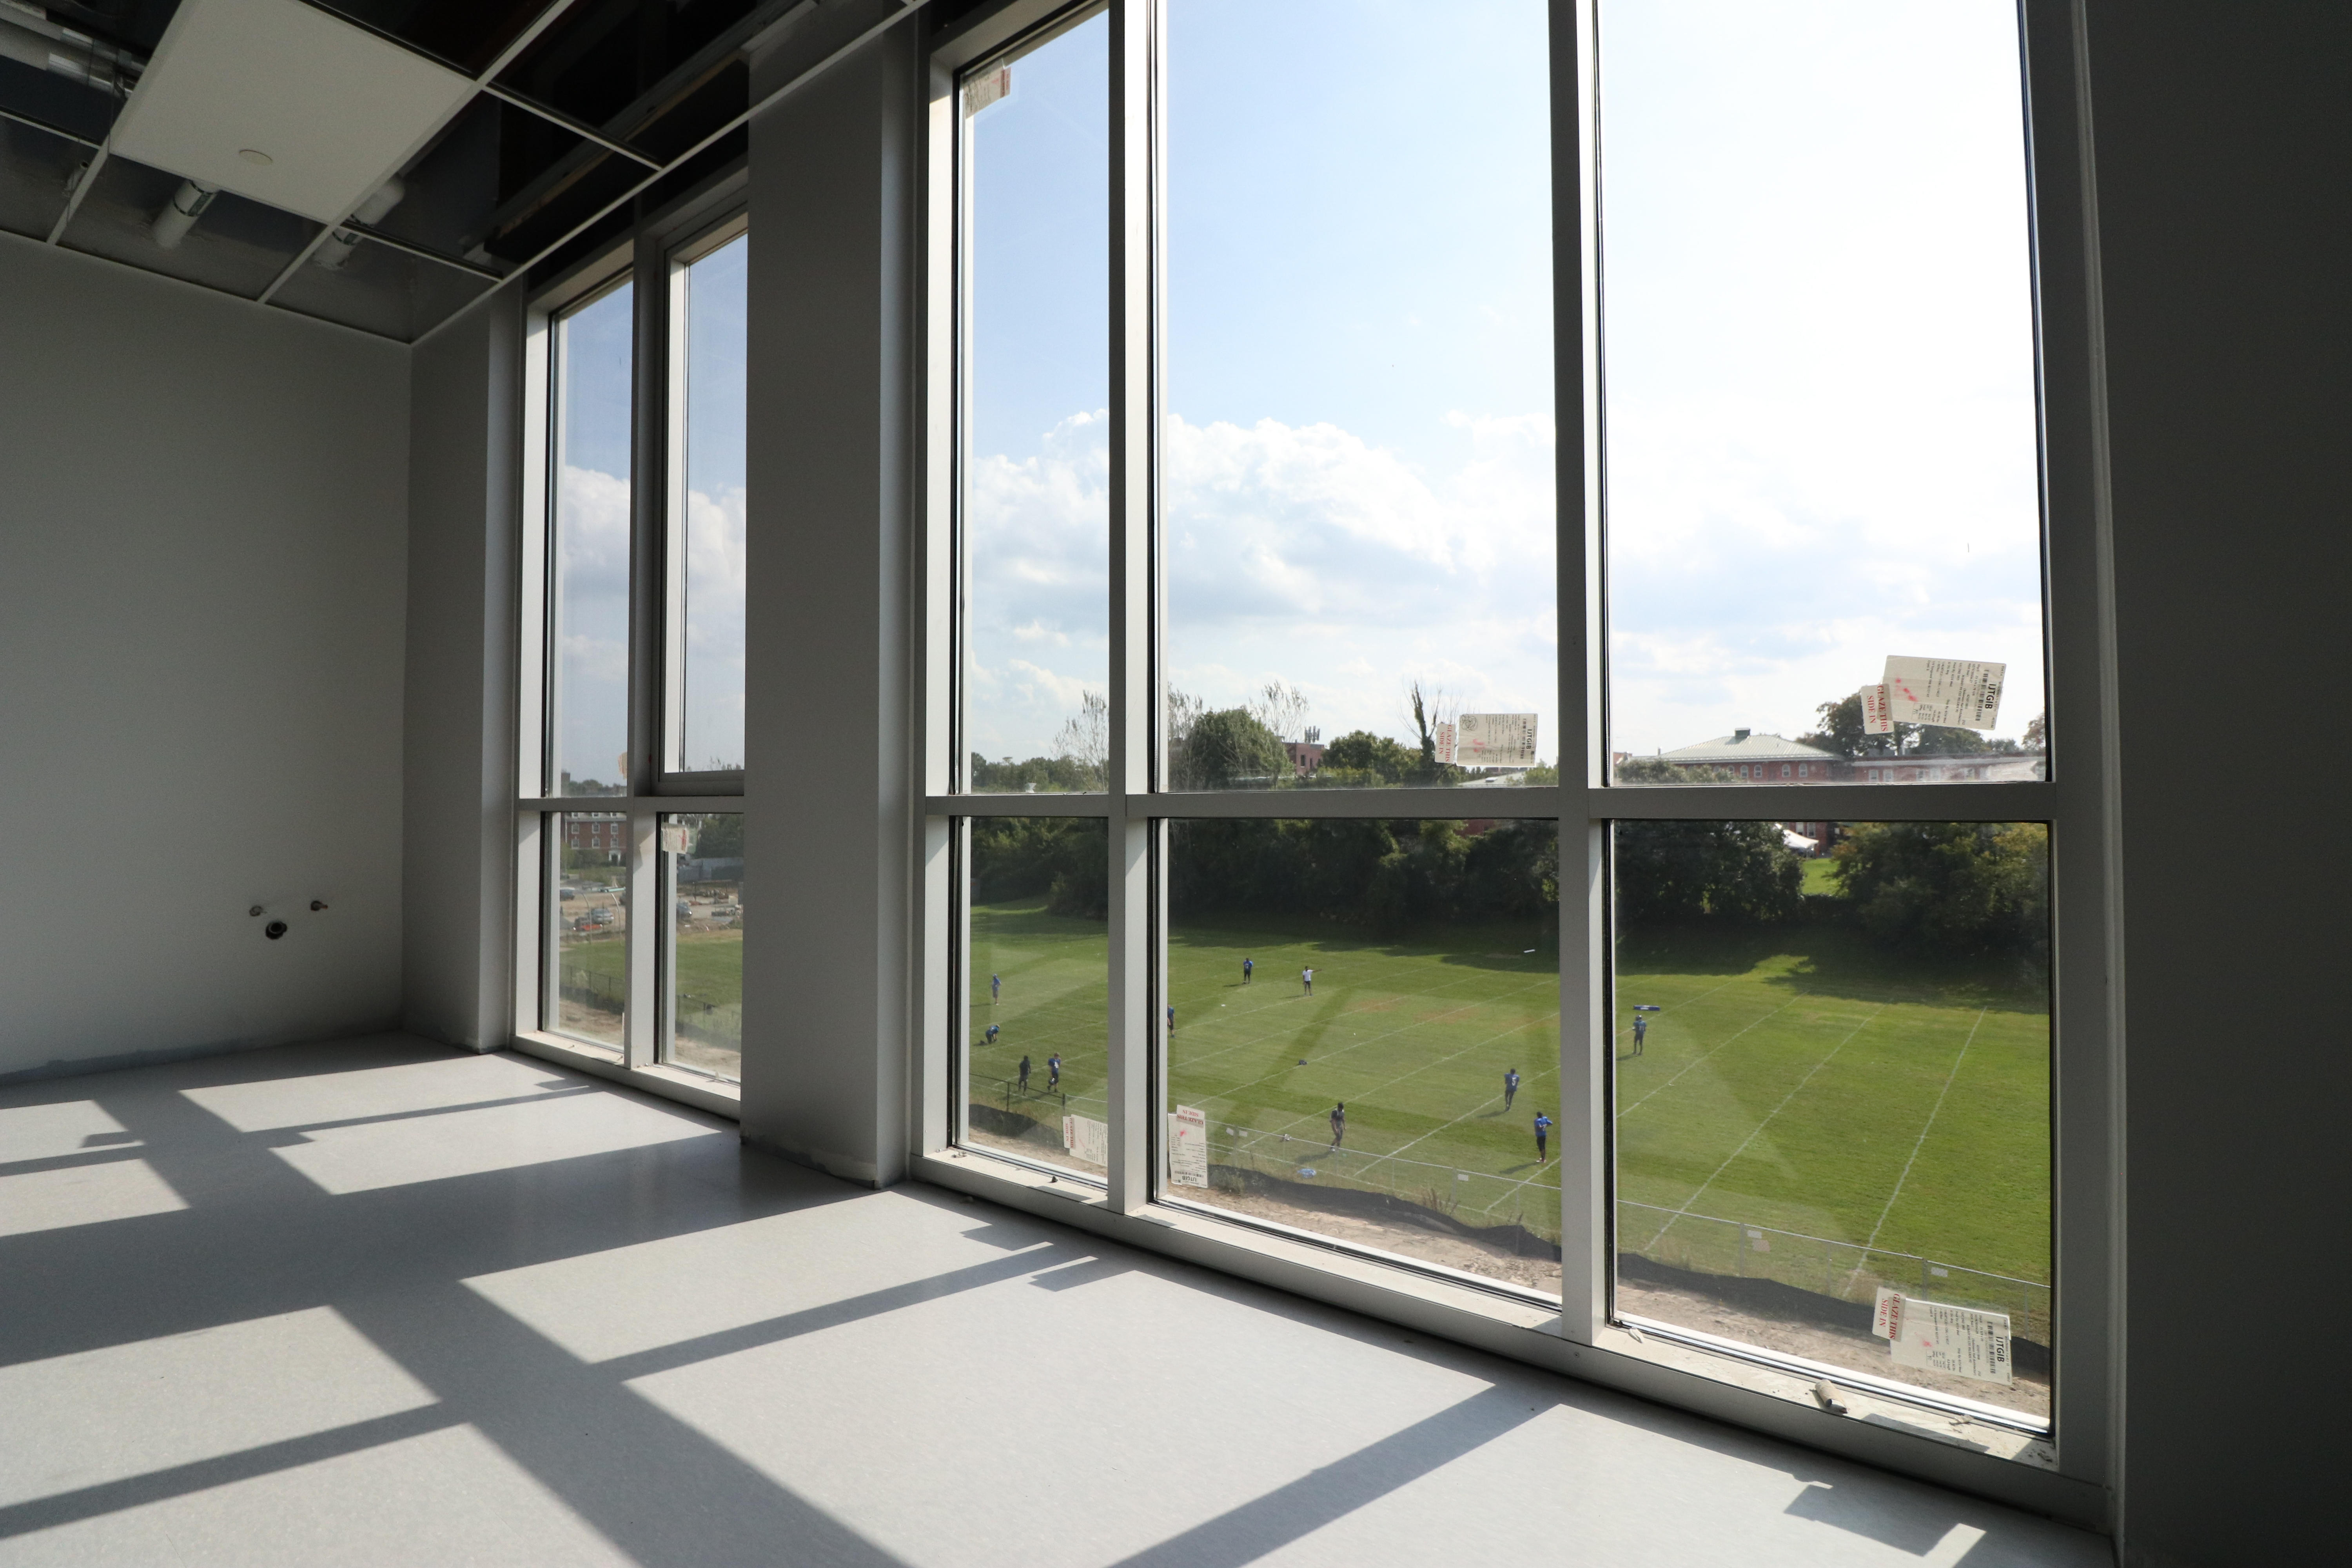 Interior of a classroom in the new Phase I academic building, with large, sun-filled windows facing out to the field